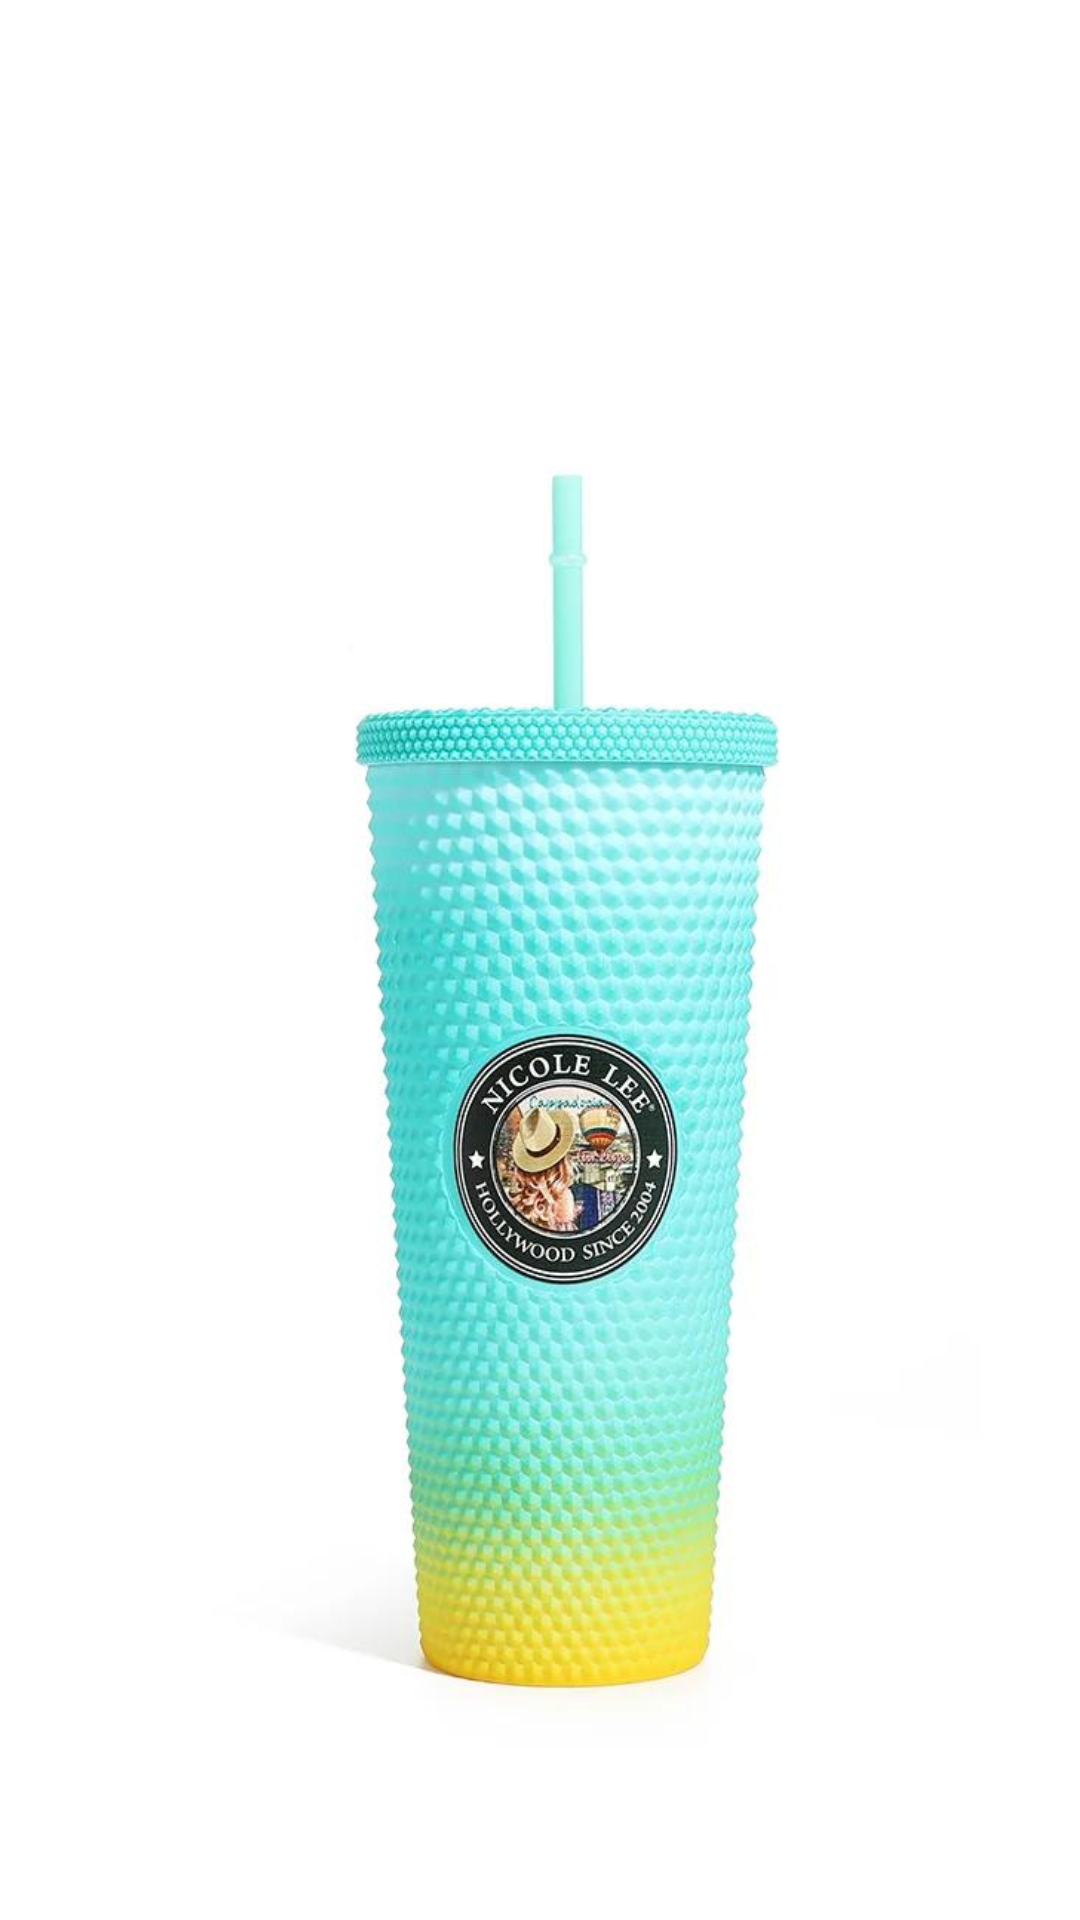 24 OZ STUDDED TUMBLER WITH STRAW